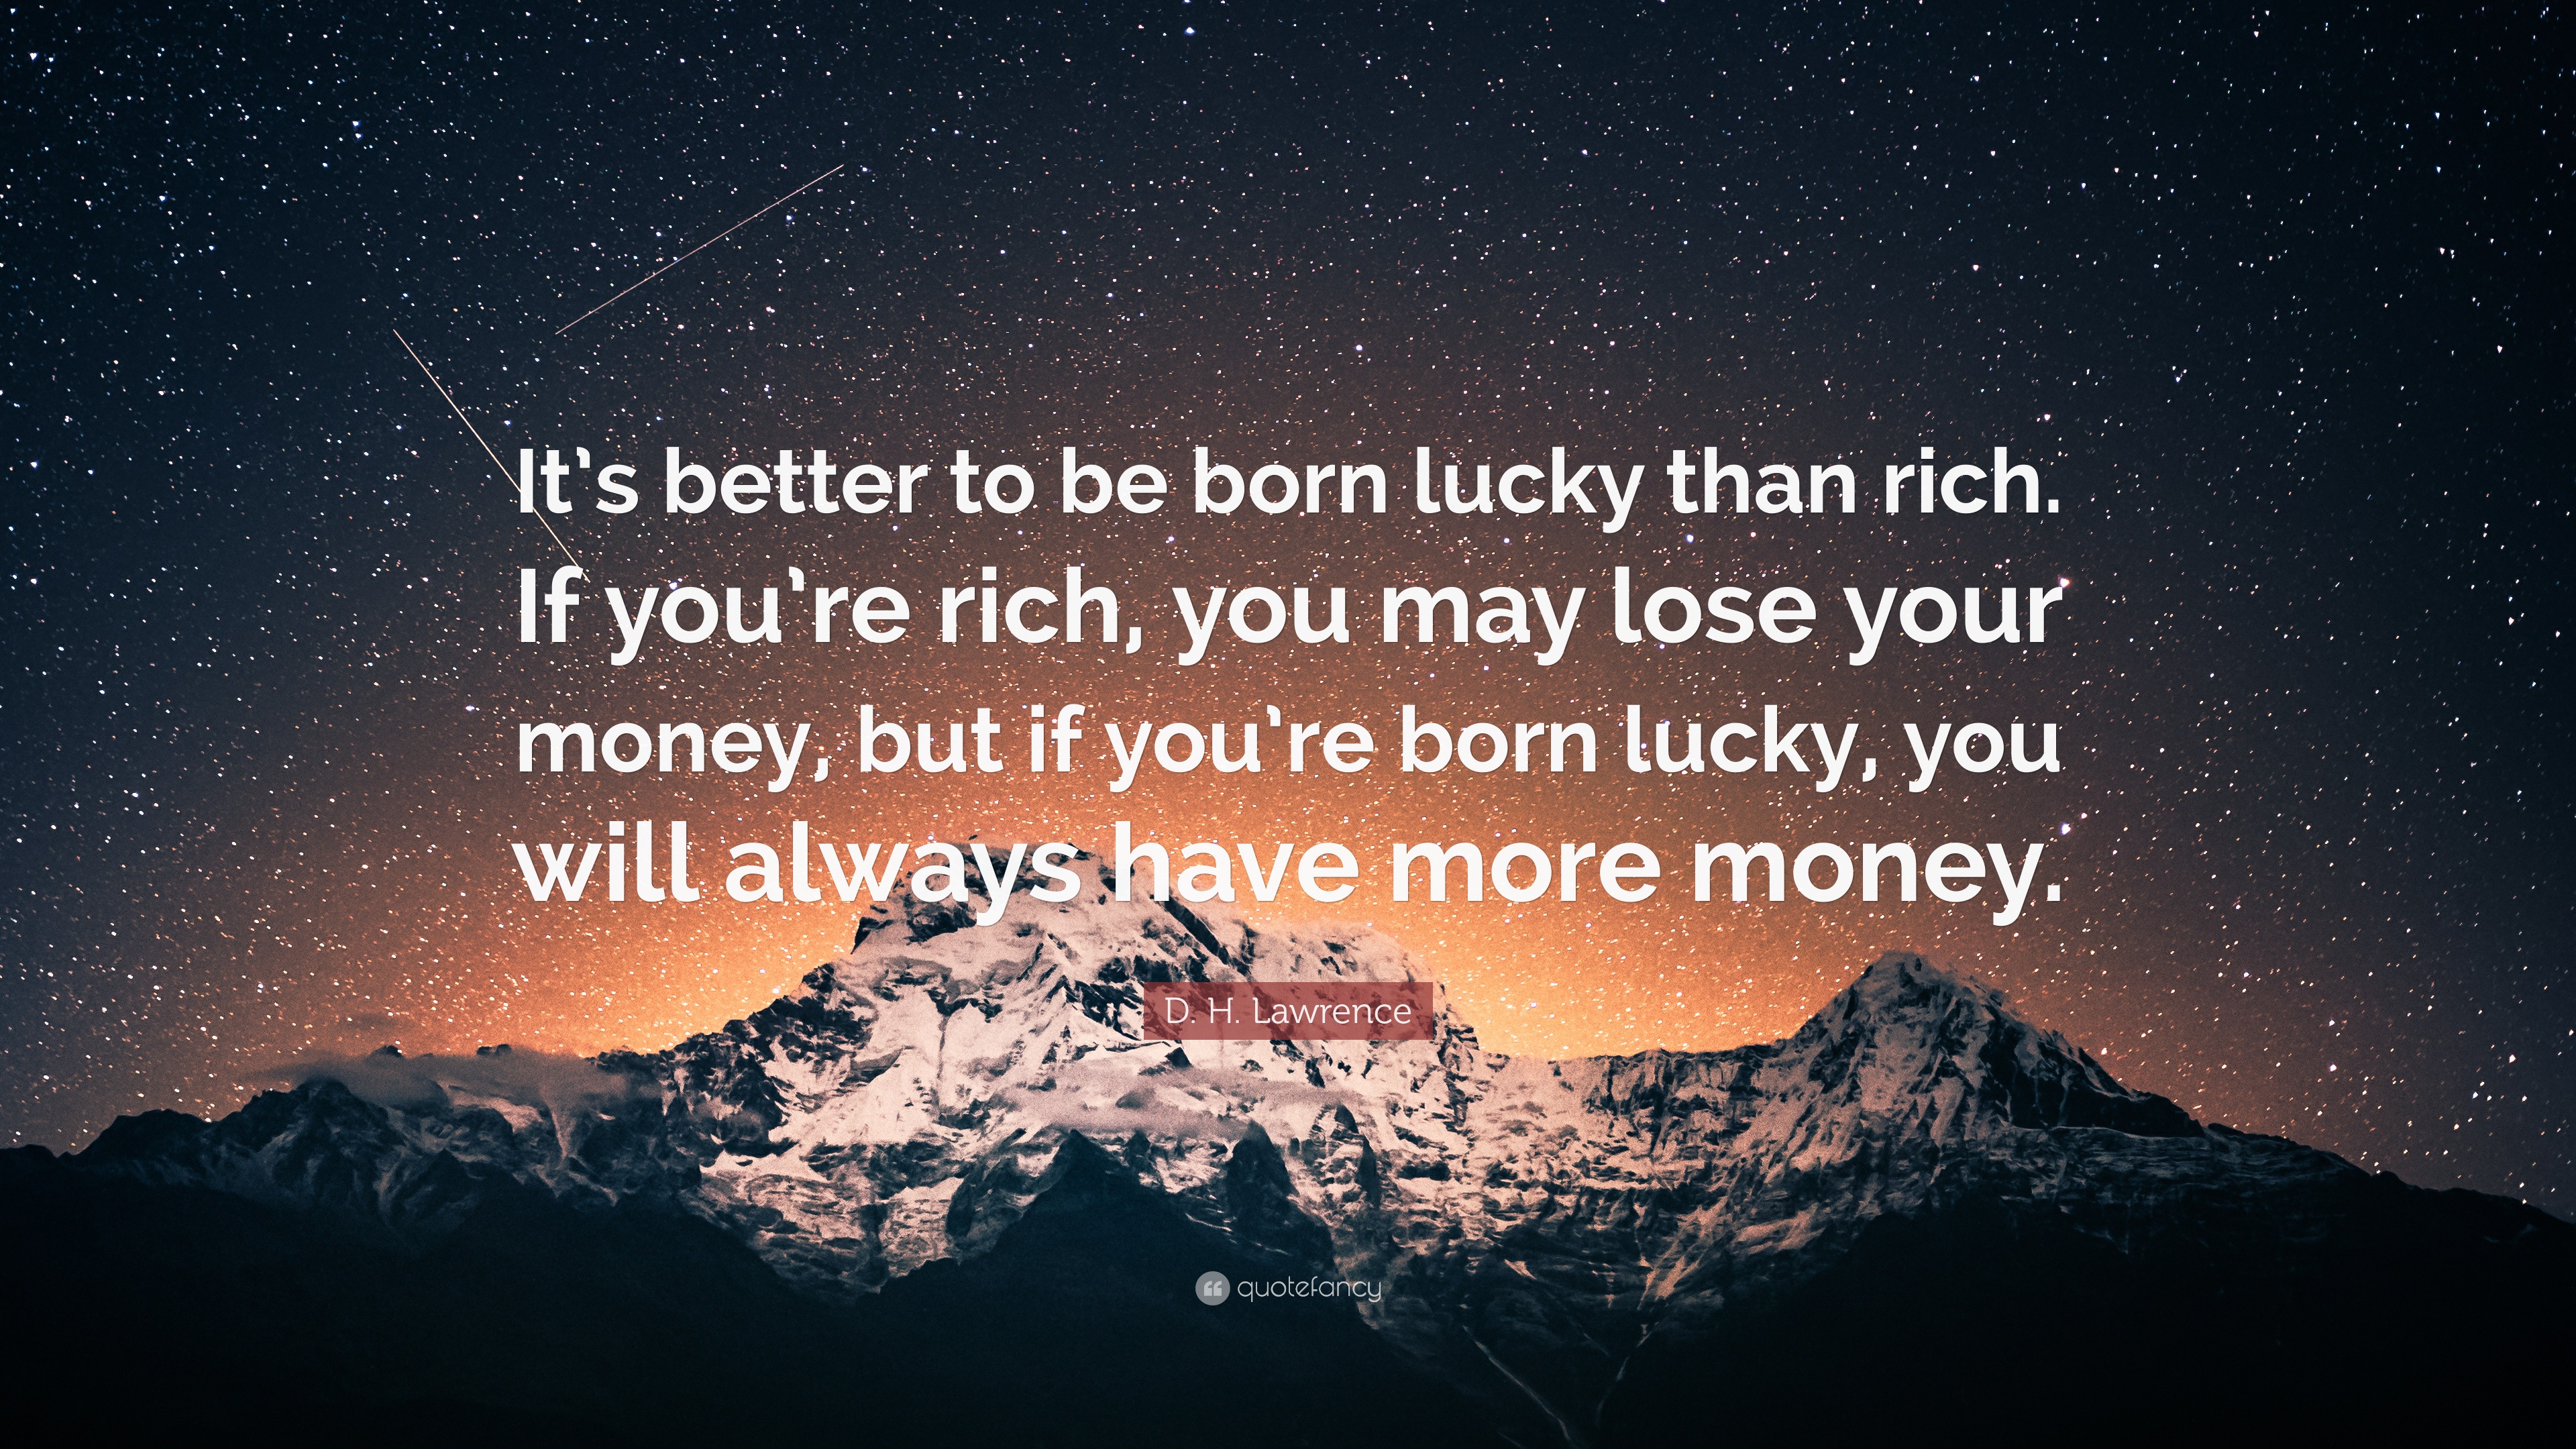 D. H. Lawrence Quote: “It's better to be born lucky than rich. If you're  rich, you may lose your money, but if you're born lucky, you will alwa...”